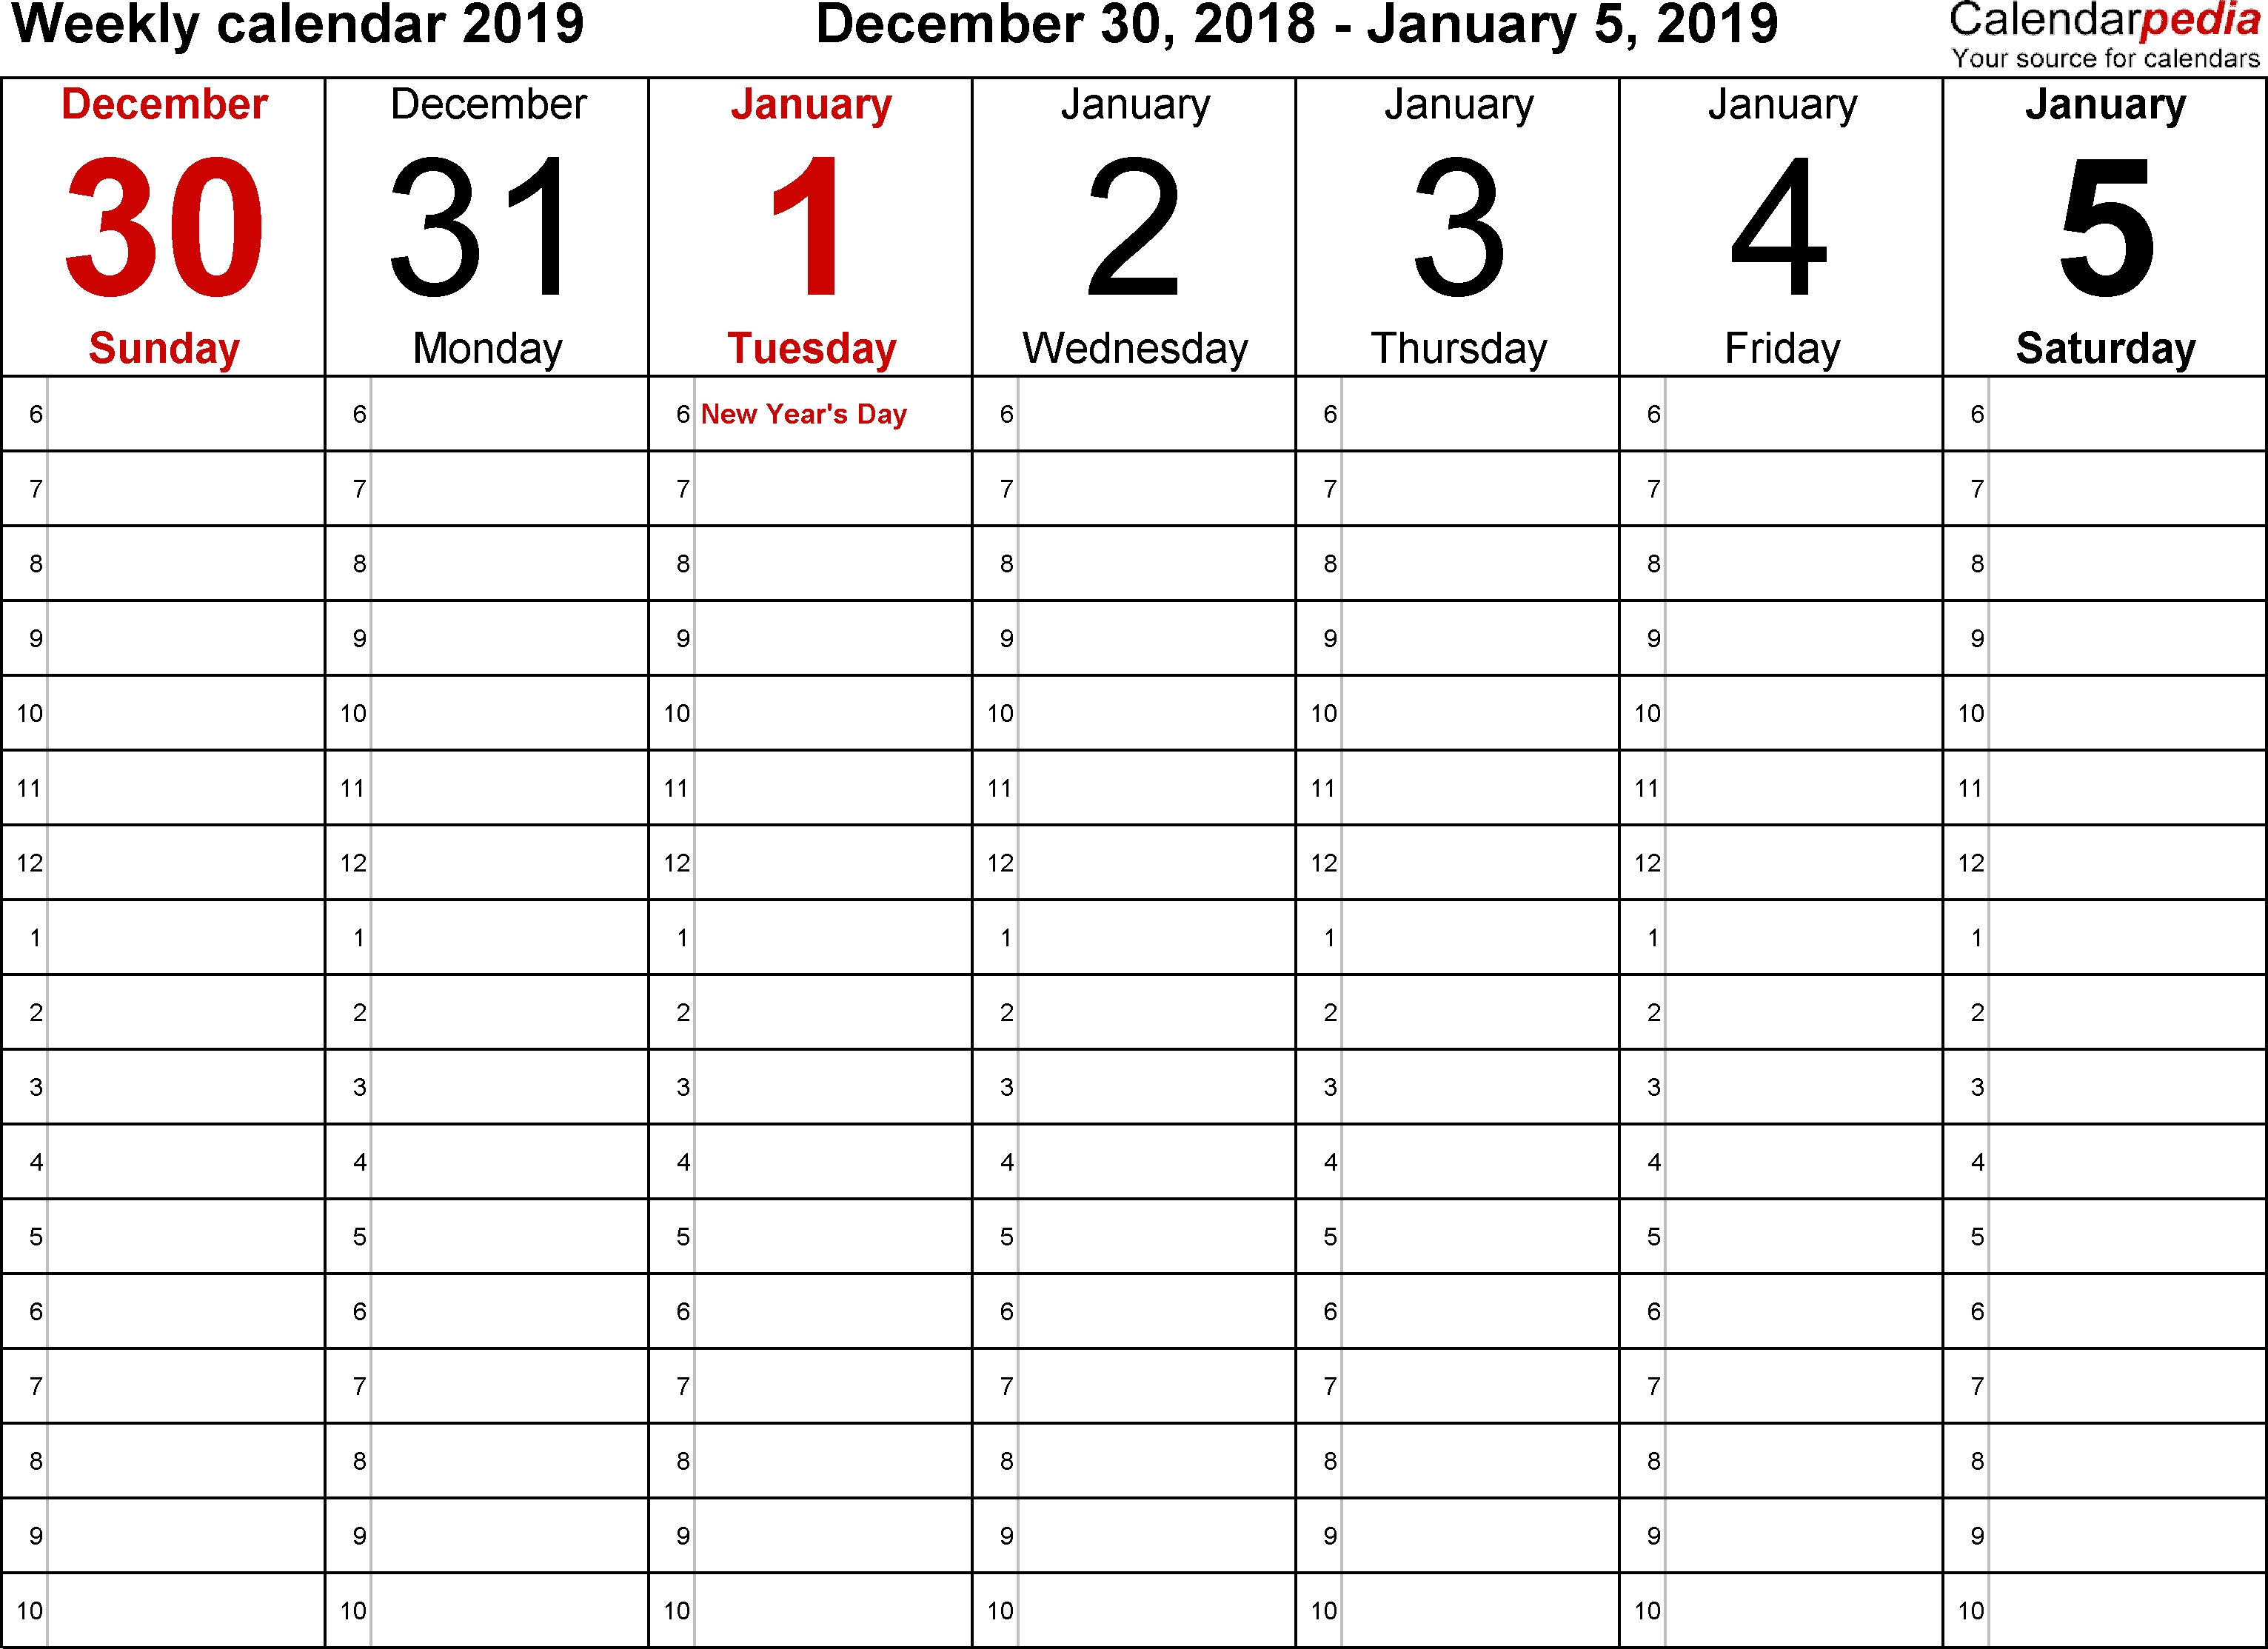 Weekly Calendar 2019 For Word - 12 Free Printable Templates-2 Page Monthly Planner Template